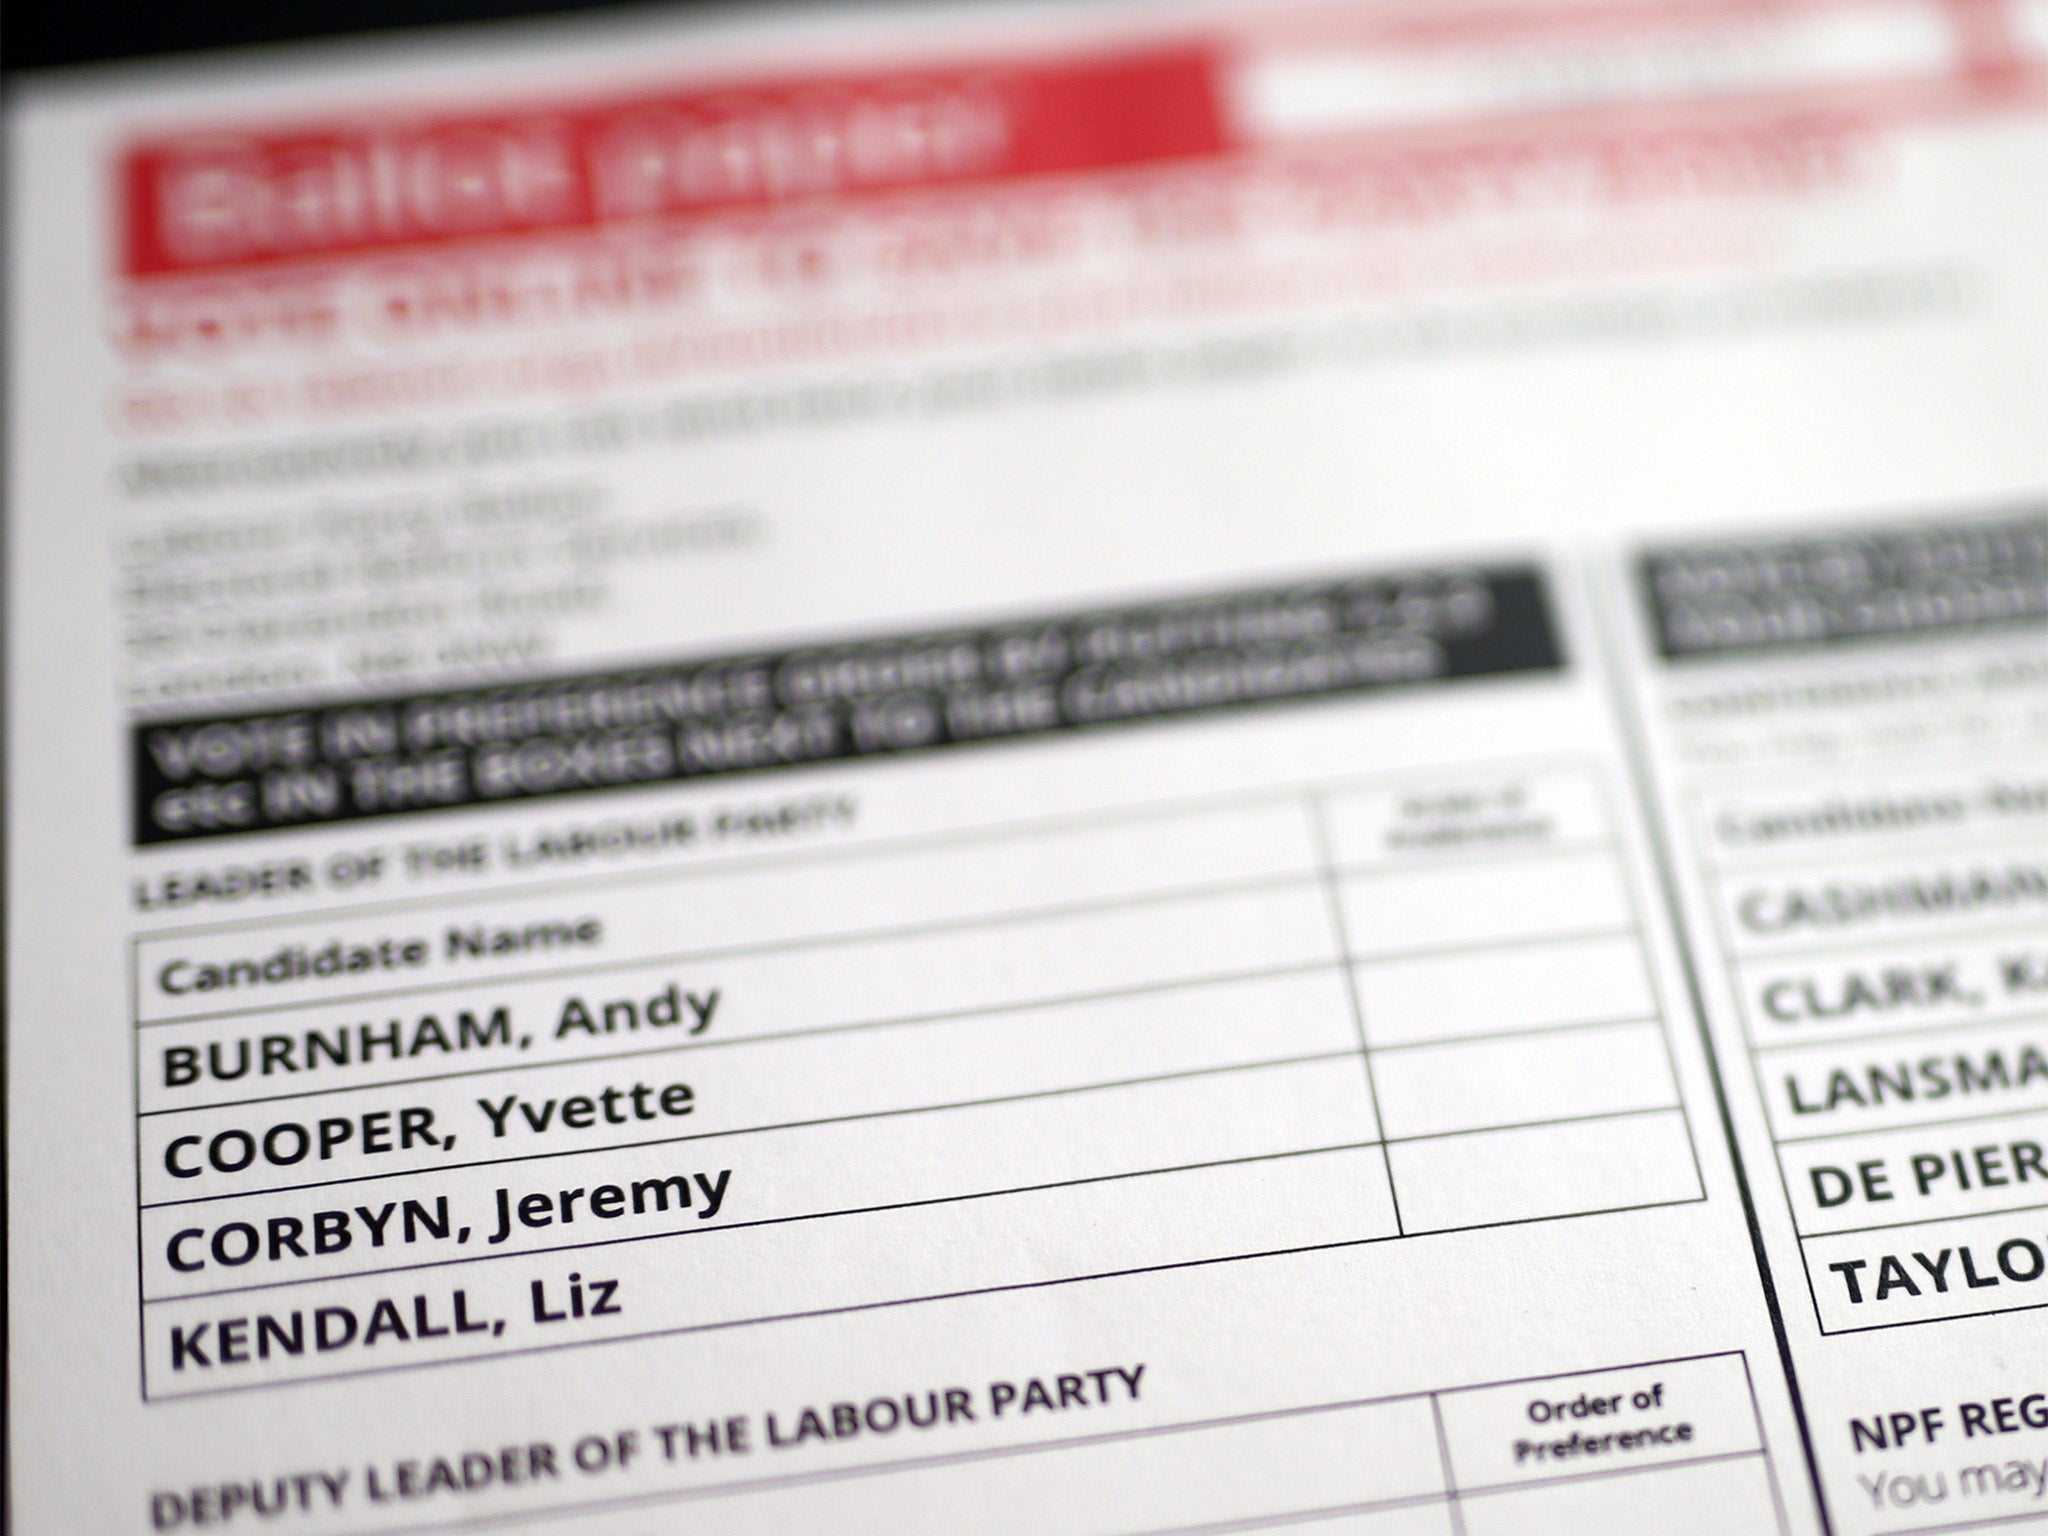 Labour Party members are due to vote in the Party leadership contest with results announced on the 12 September